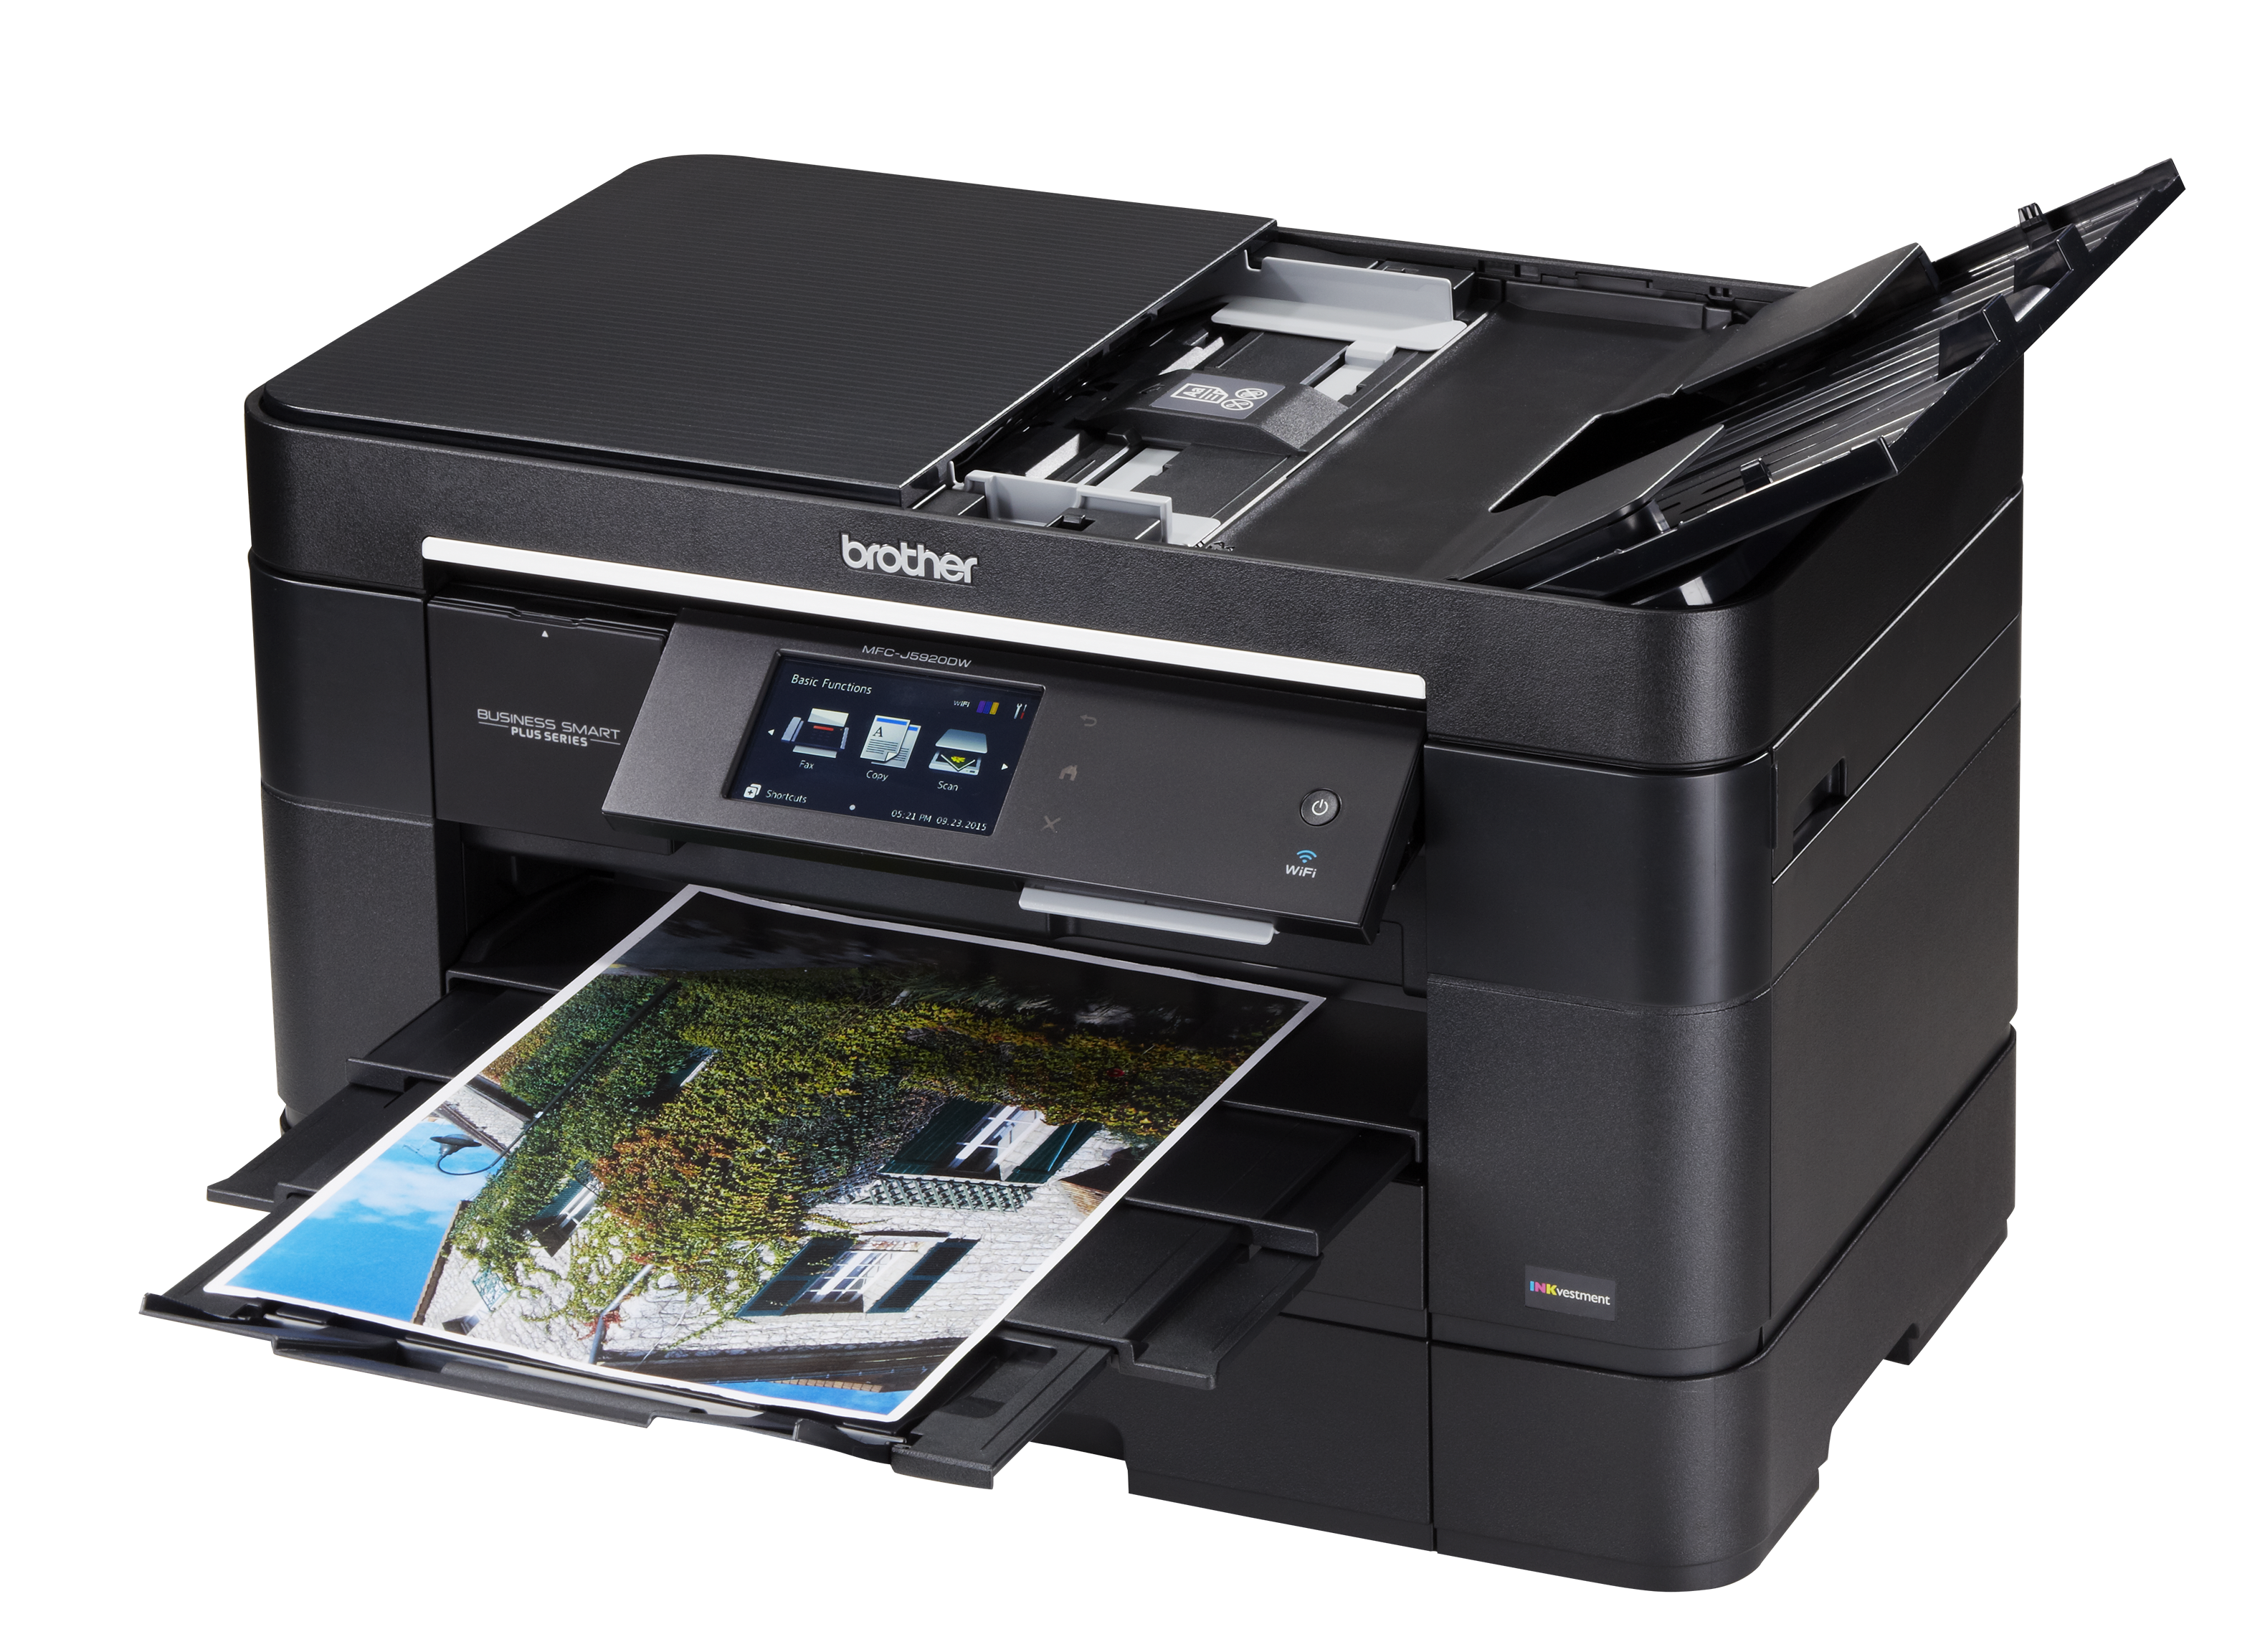 Brother MFC-J5920DW Printer Review - Consumer Reports